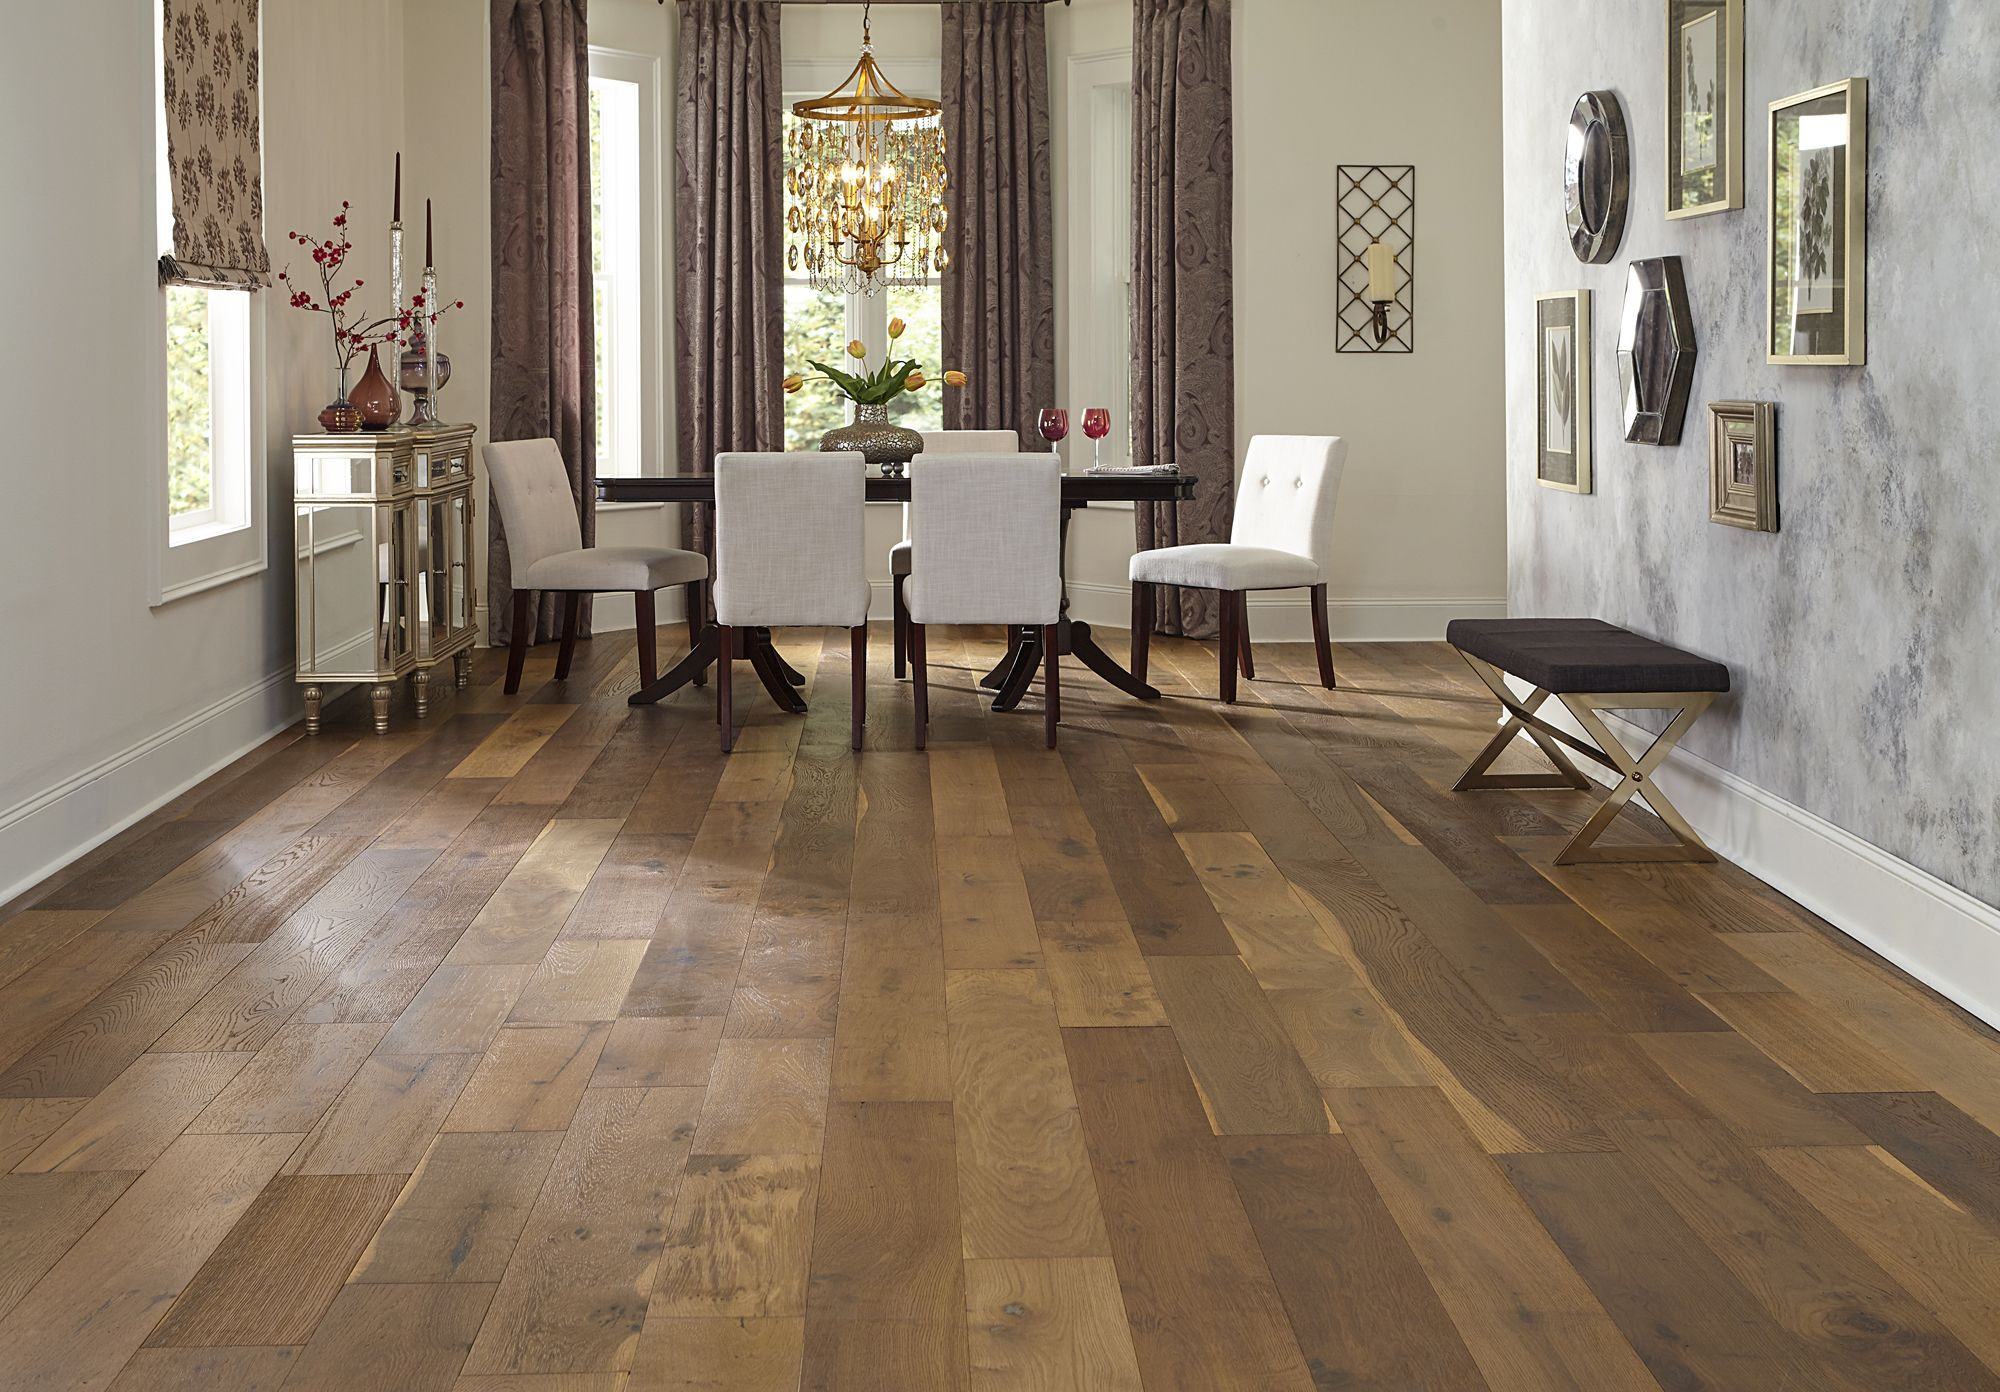 hardwood floor width trend of 7 1 2 wide planks and a rustic look bellawood willow manor oak has inside 7 1 2 wide planks and a rustic look bellawood willow manor oak has a storied old world appearance